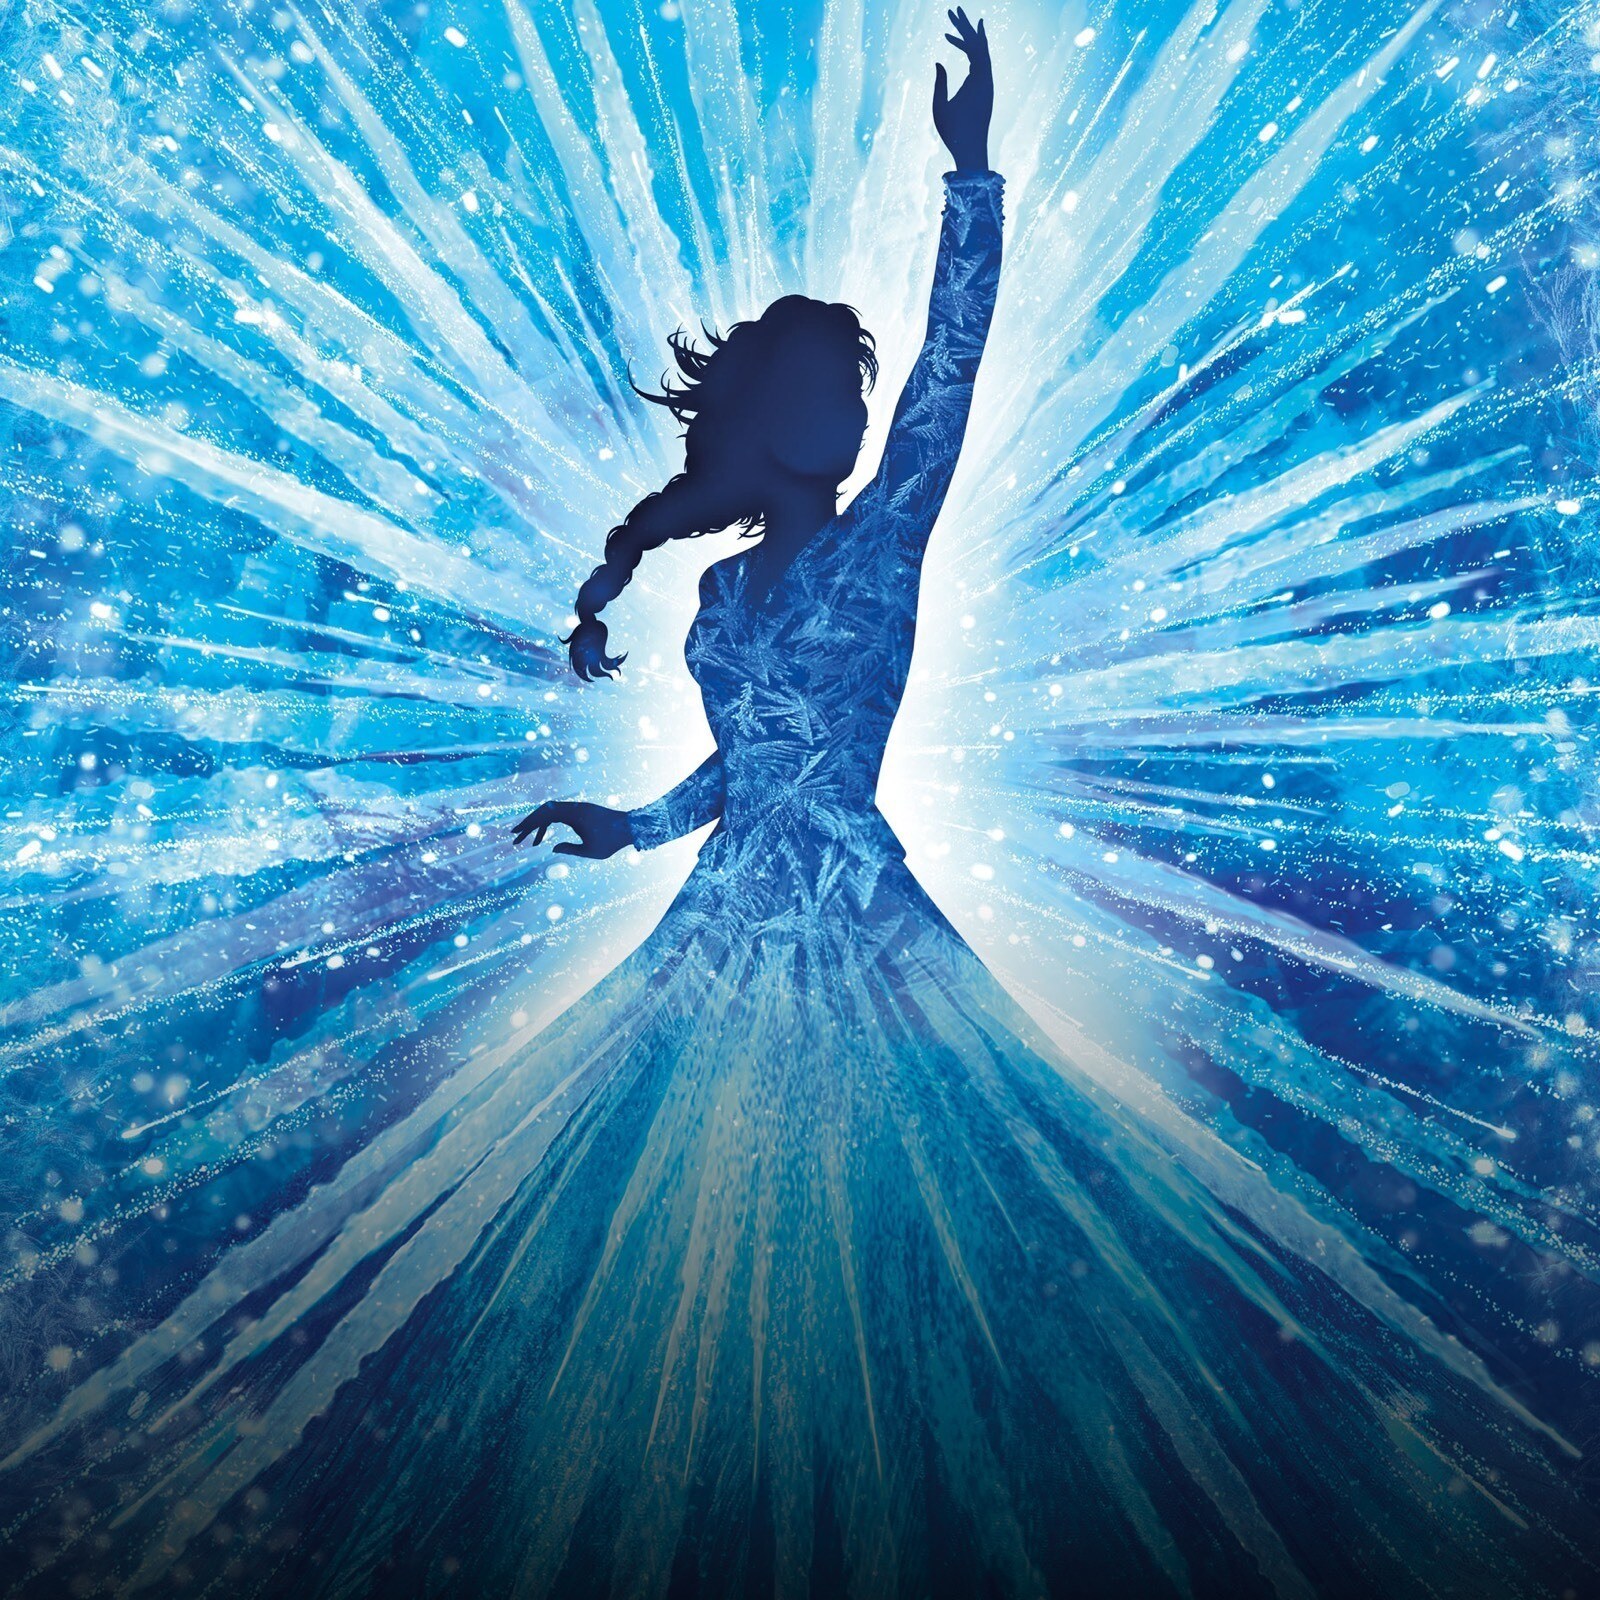 A silhouette of Elsa holding her arm up, with crystals forming around her